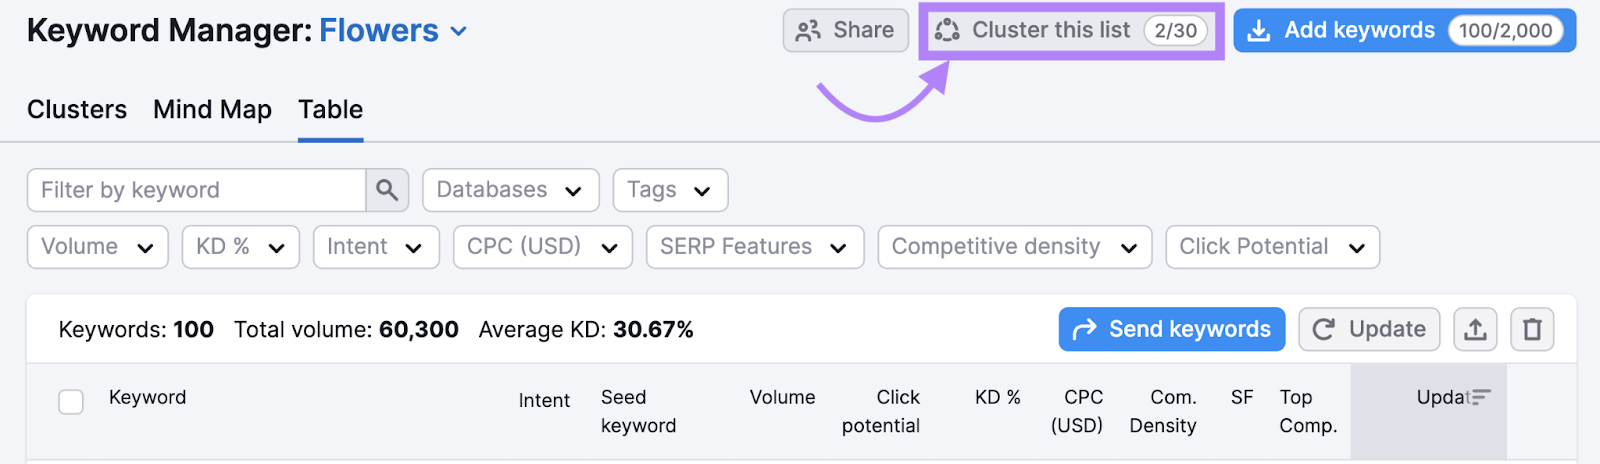 “Cluster this list" button in Keyword Manager tool